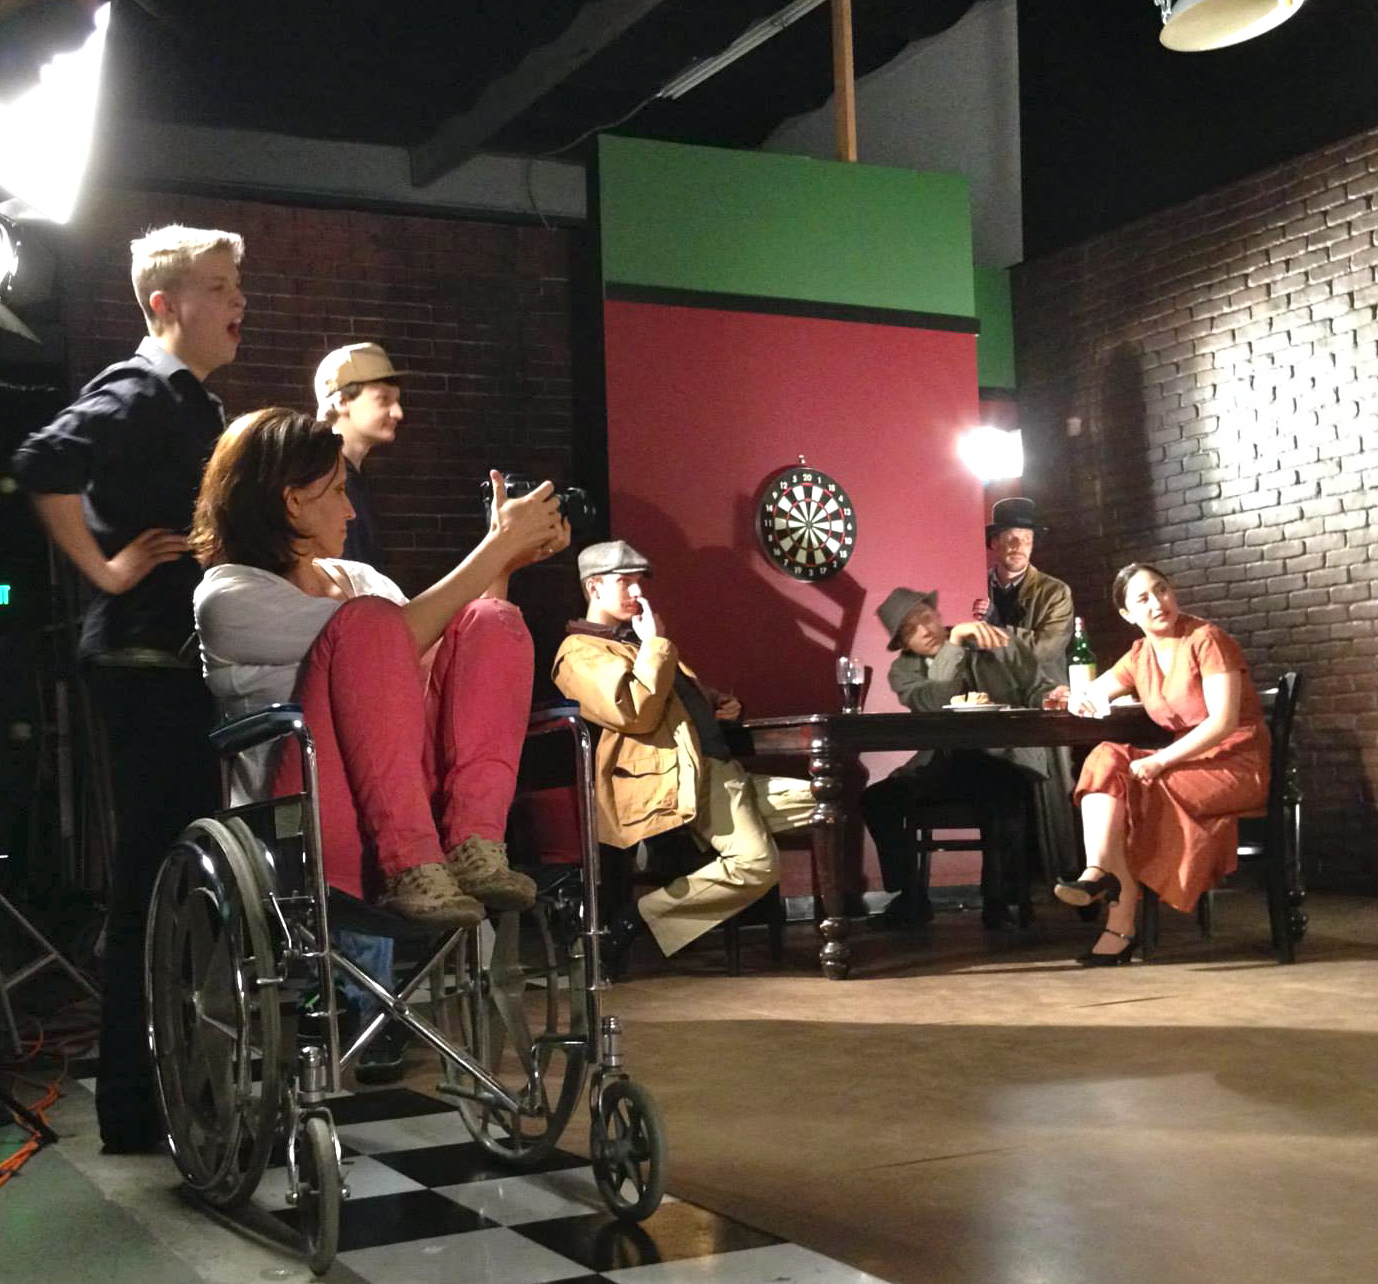 Wheelchair Dolly on set of Tolkien's Road